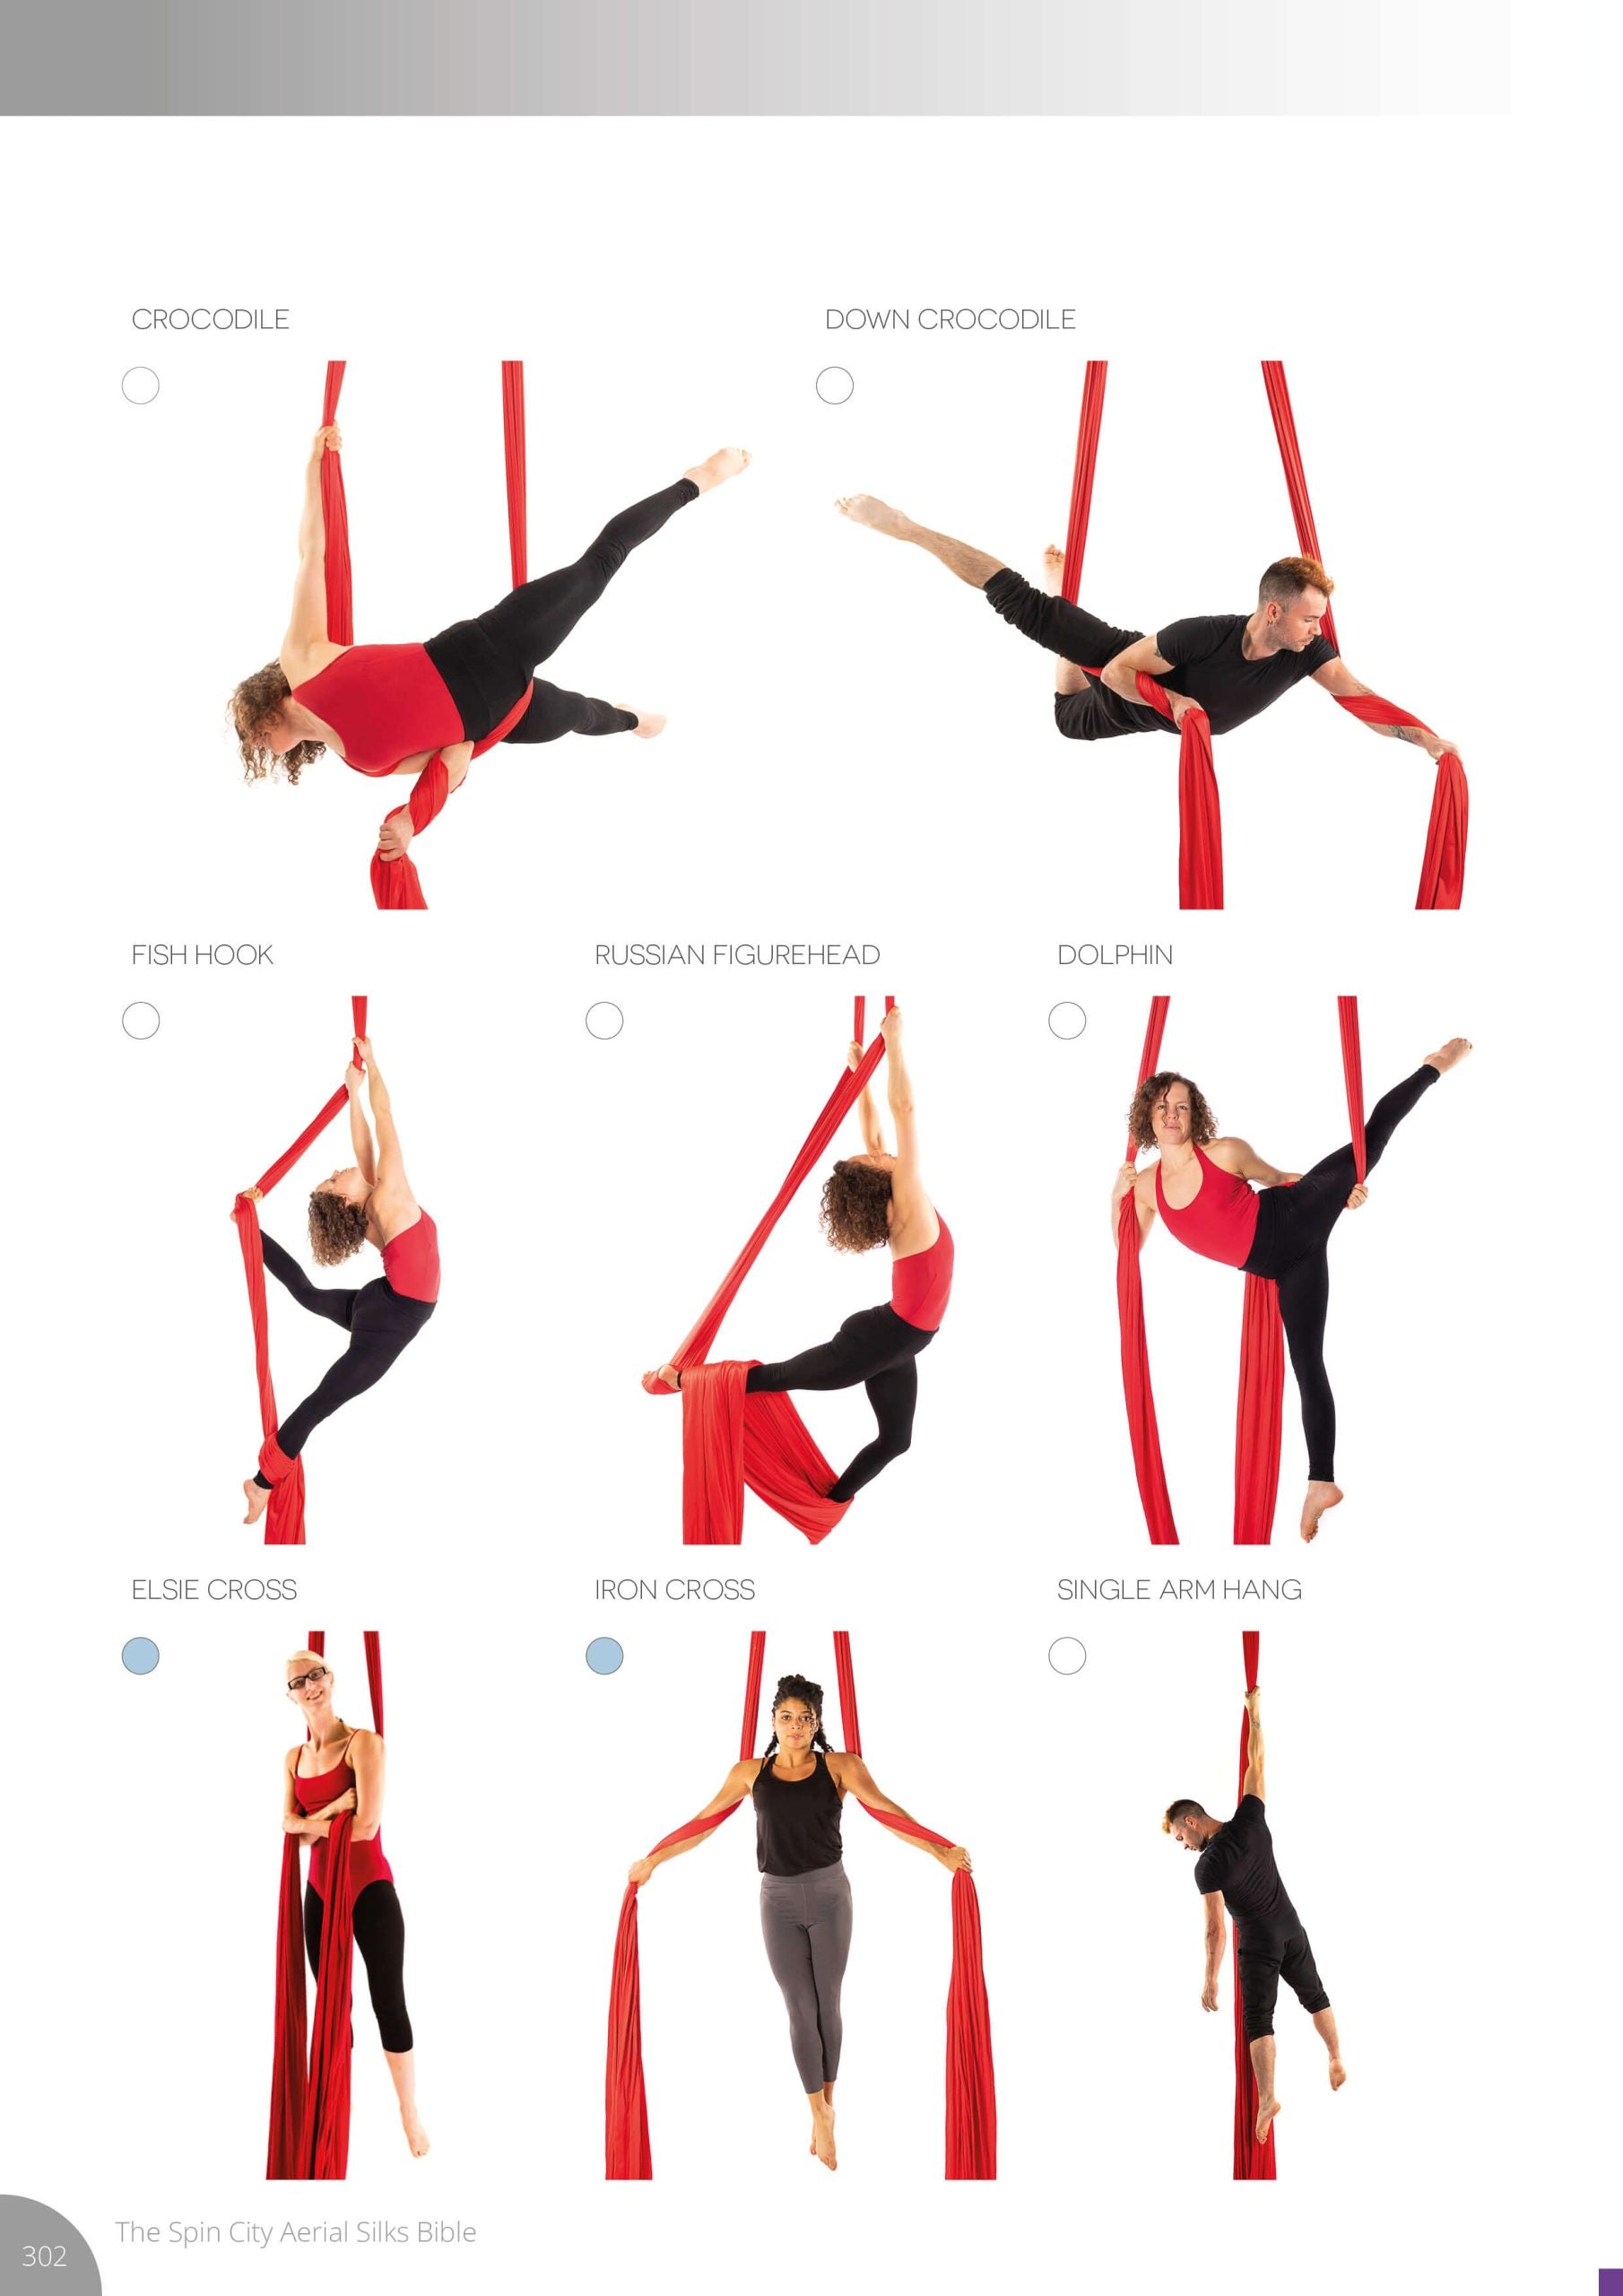 Silks Bible page using photos to demonstrate a variety of moves like crocodile, fish hook, iron cross, and single arm hang